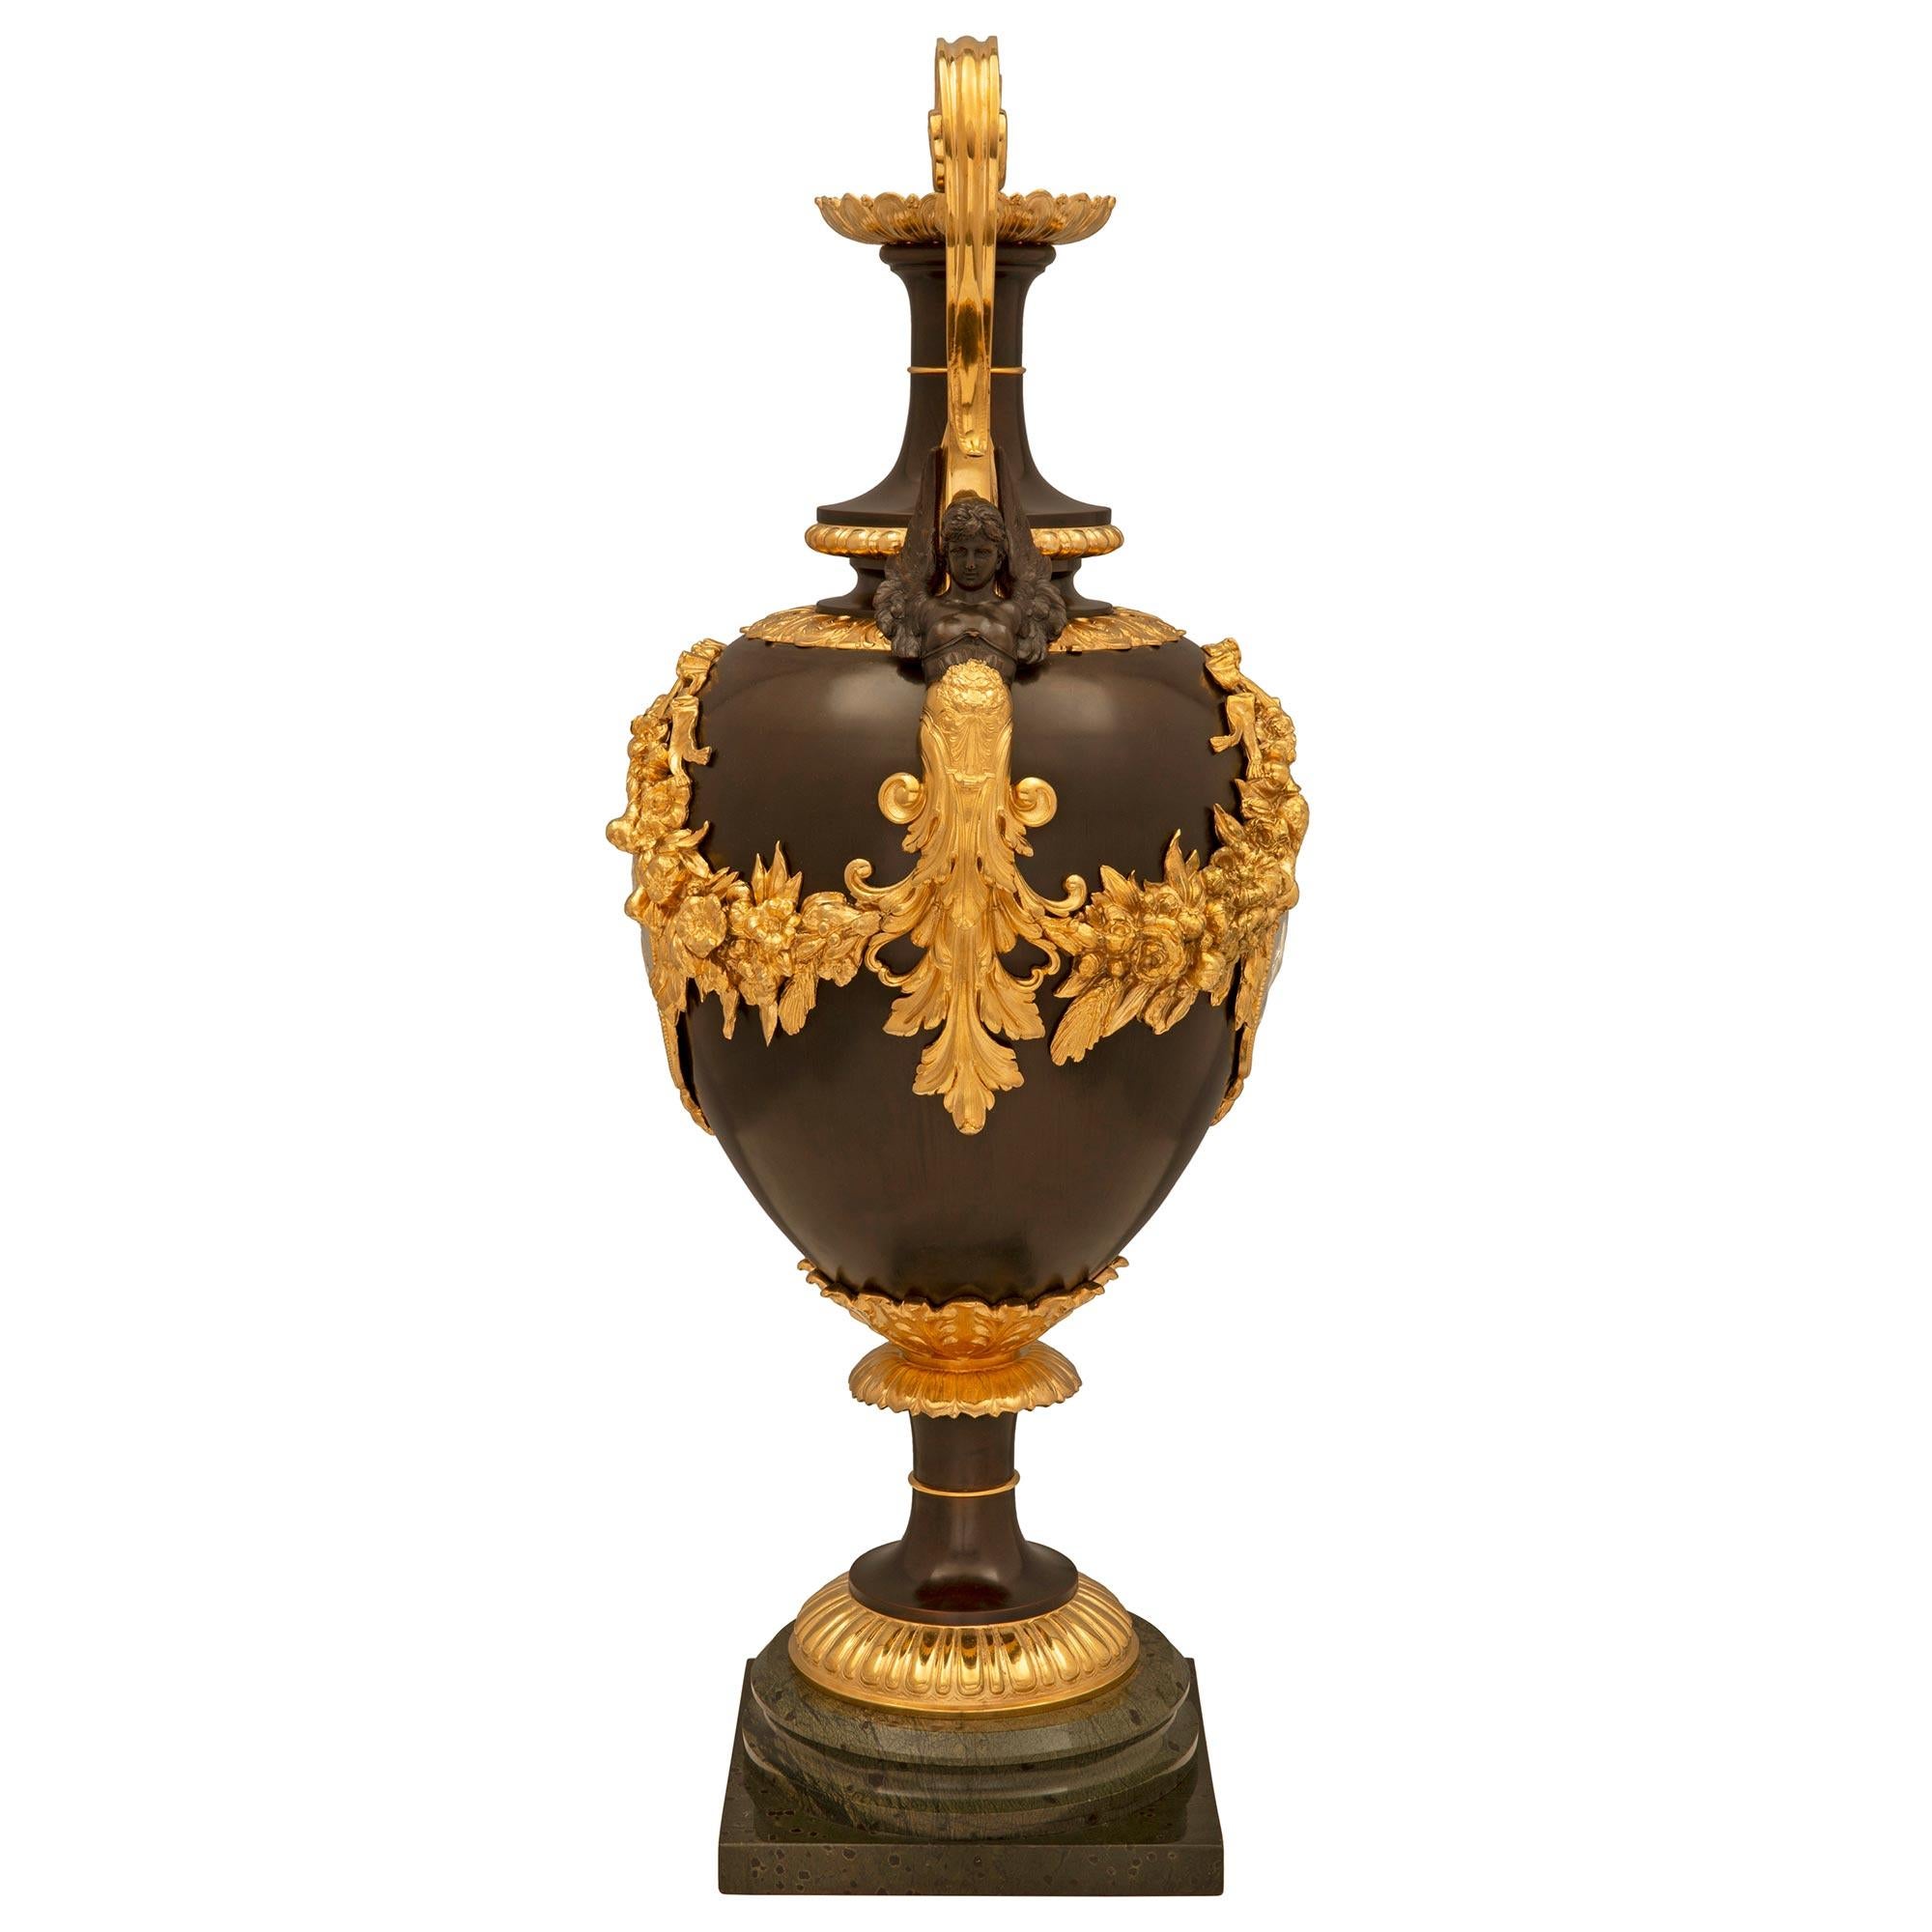 Patinated French, 19th Century, Belle Époque Period Bronze and Ormolu Urn For Sale